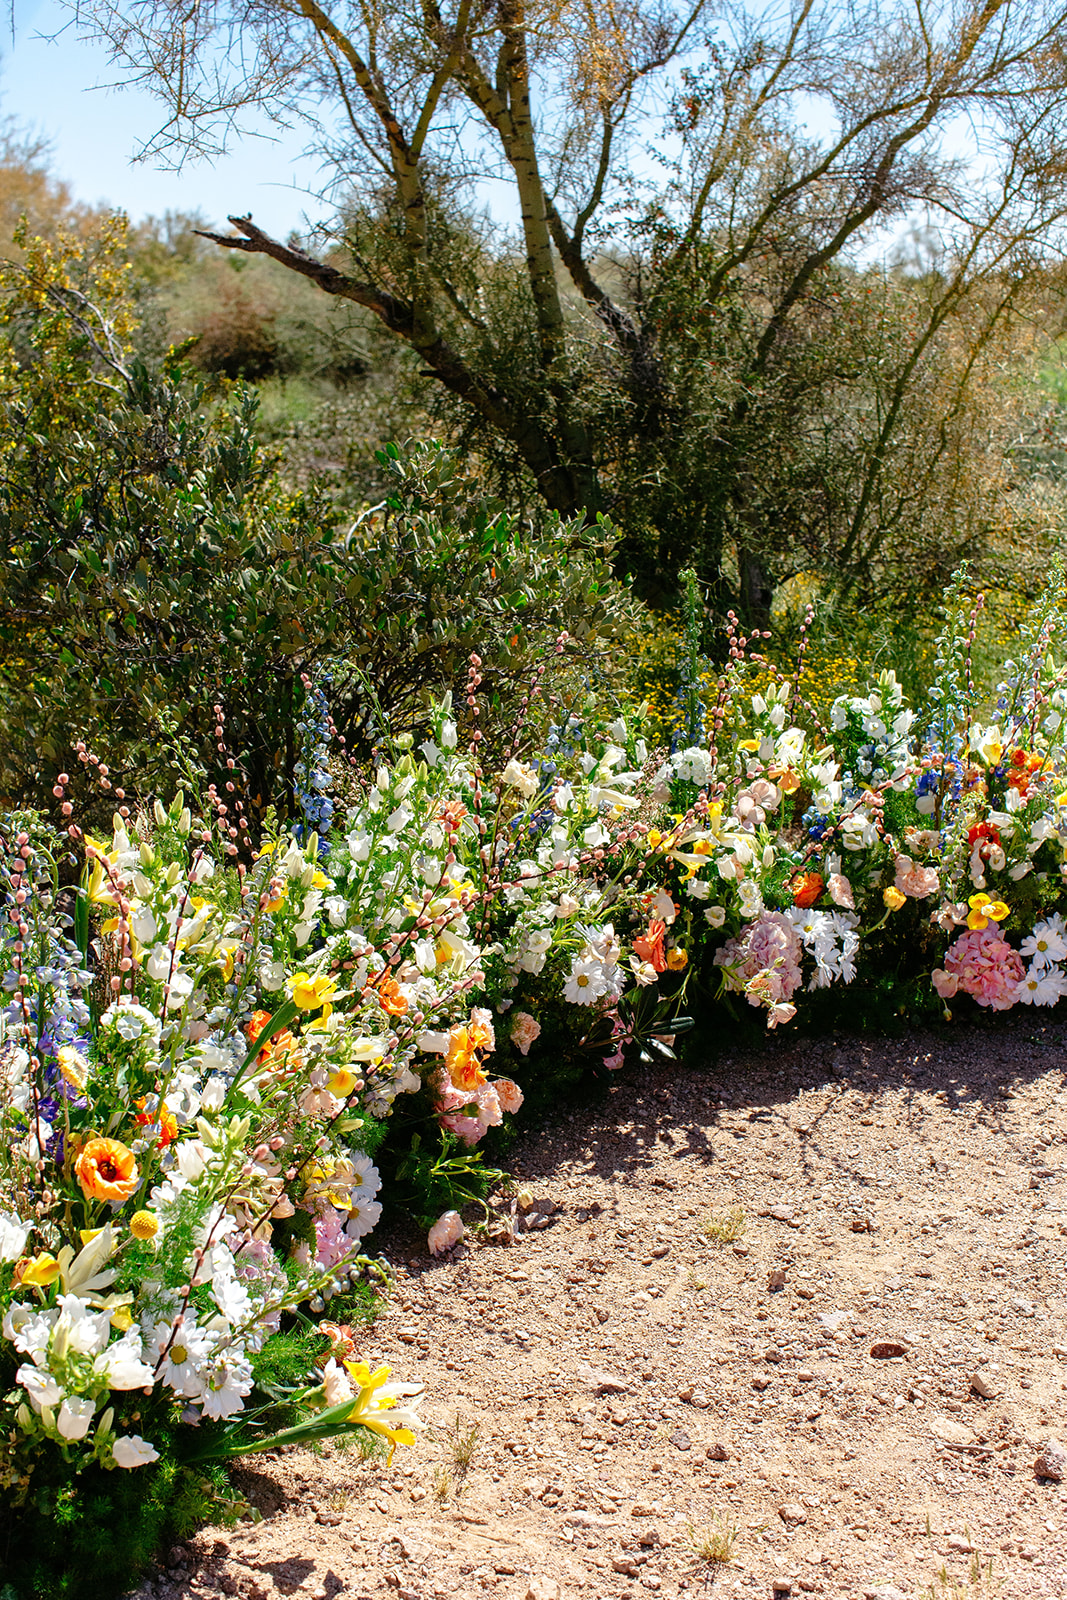 Vibrant flower bed filled with assorted flowers in full bloom, situated in a sunny outdoor setting with green shrubbery in the background.